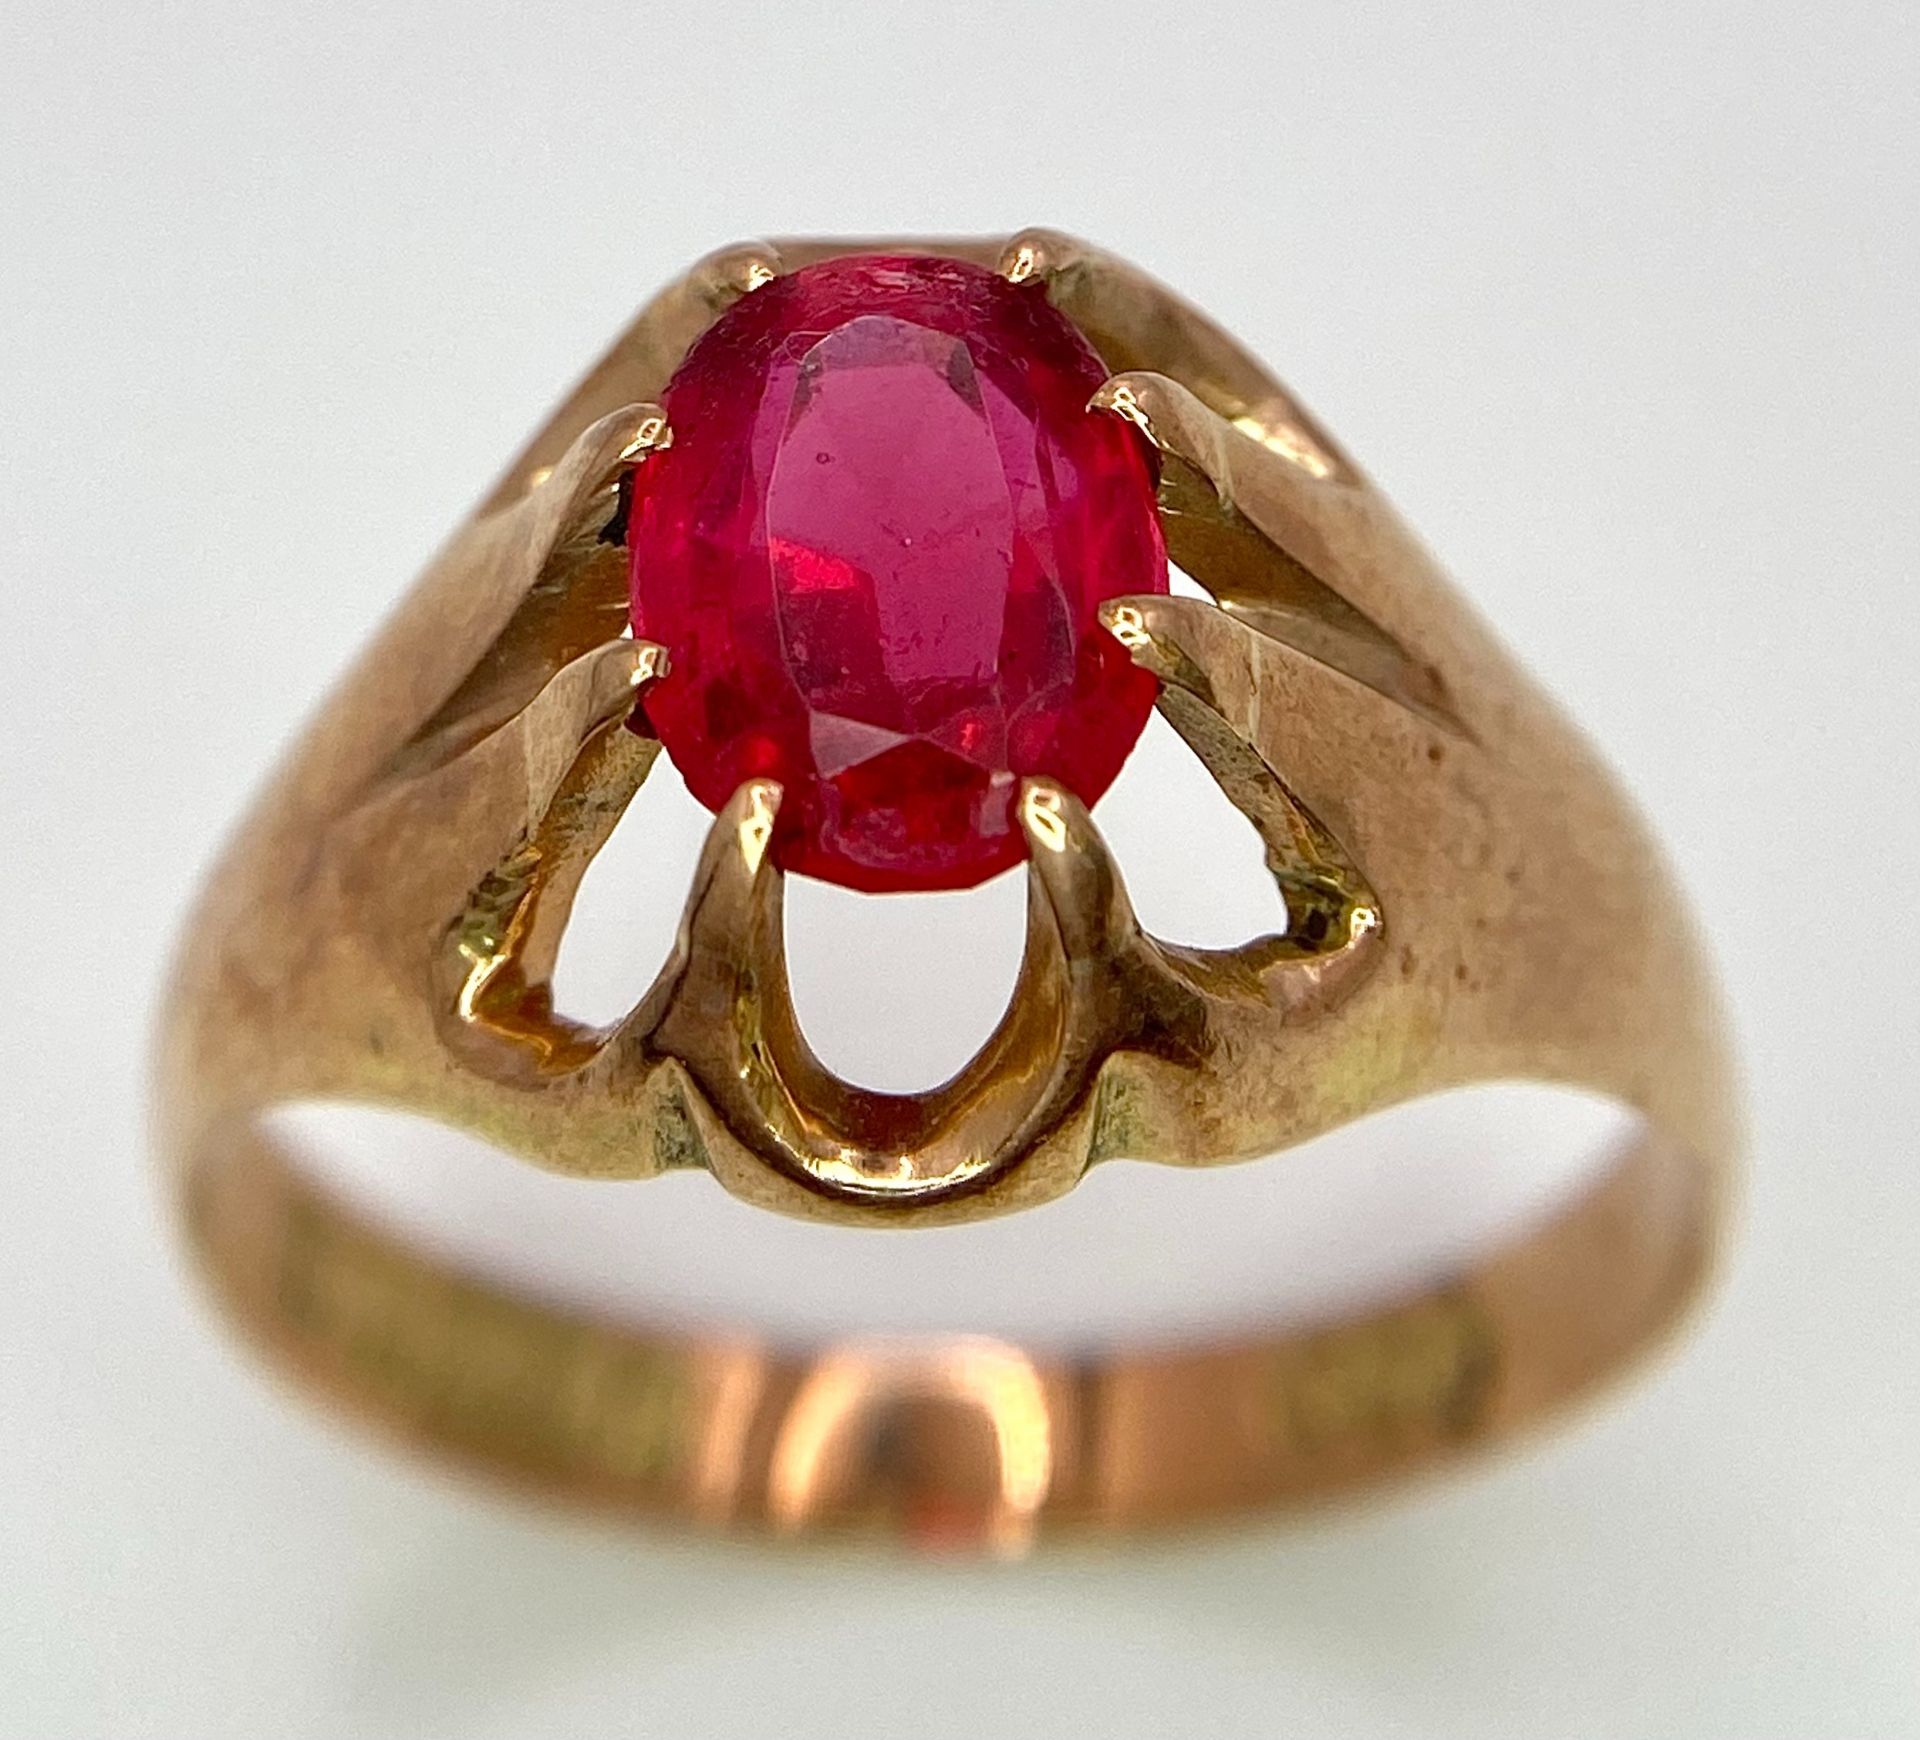 A vintage, 9 K rose gold solitaire ring with an oval cut ruby, ring size: U, weight: 3.8 g.